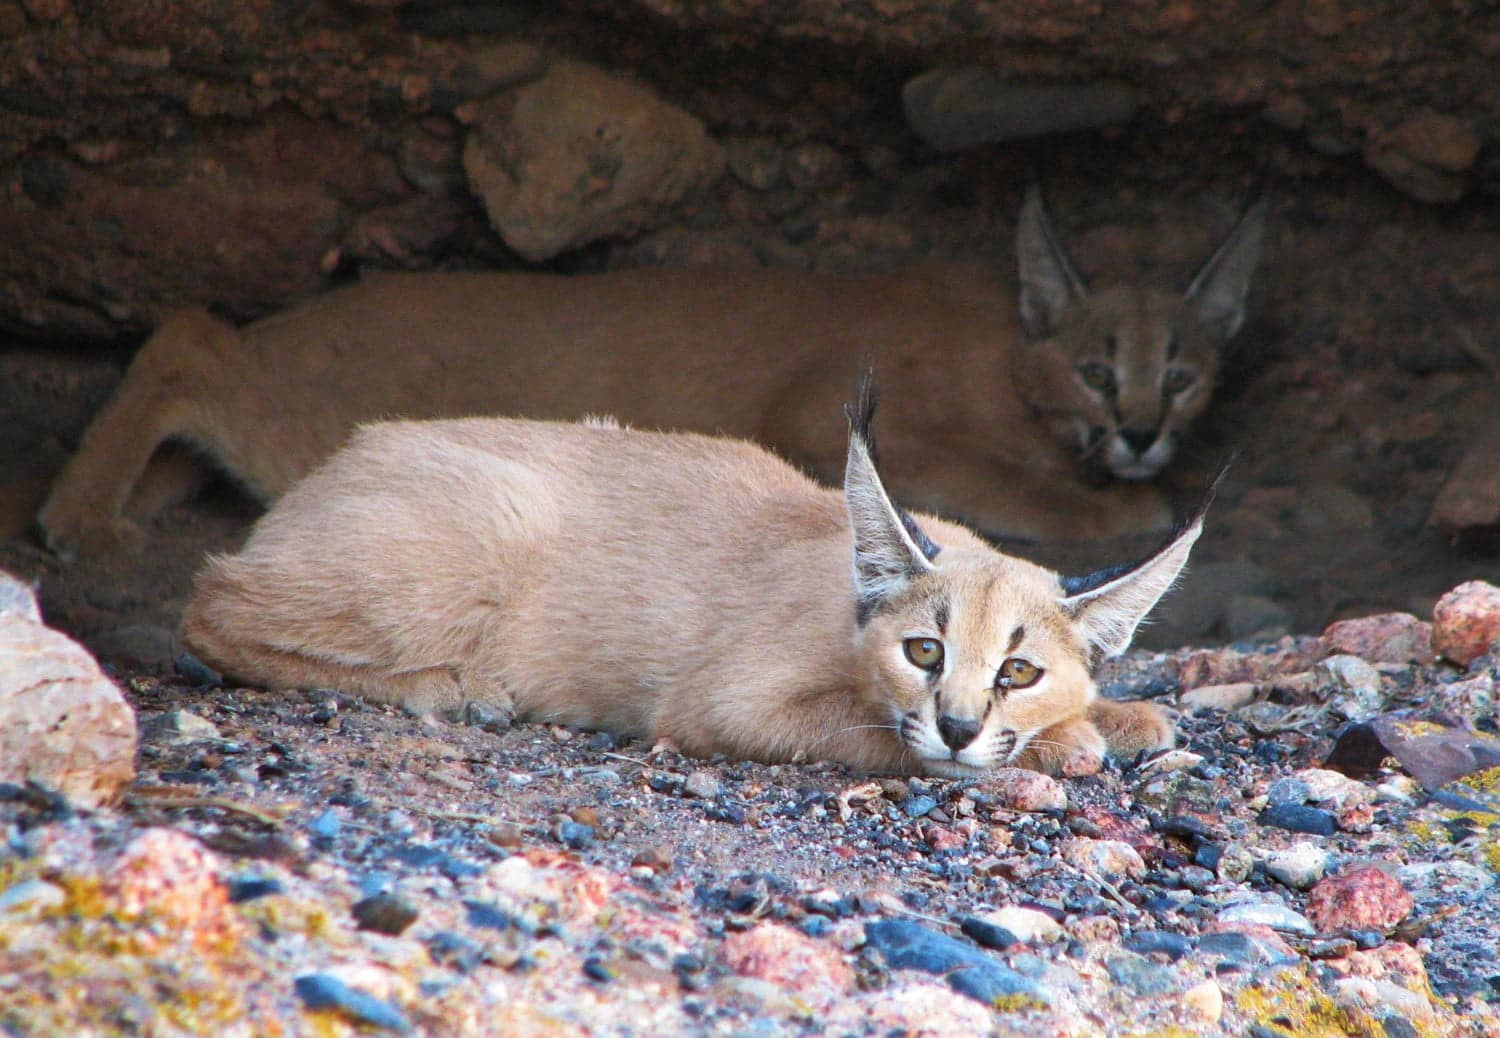 The Caracal is one of the small felid species and secretive animal in Iran